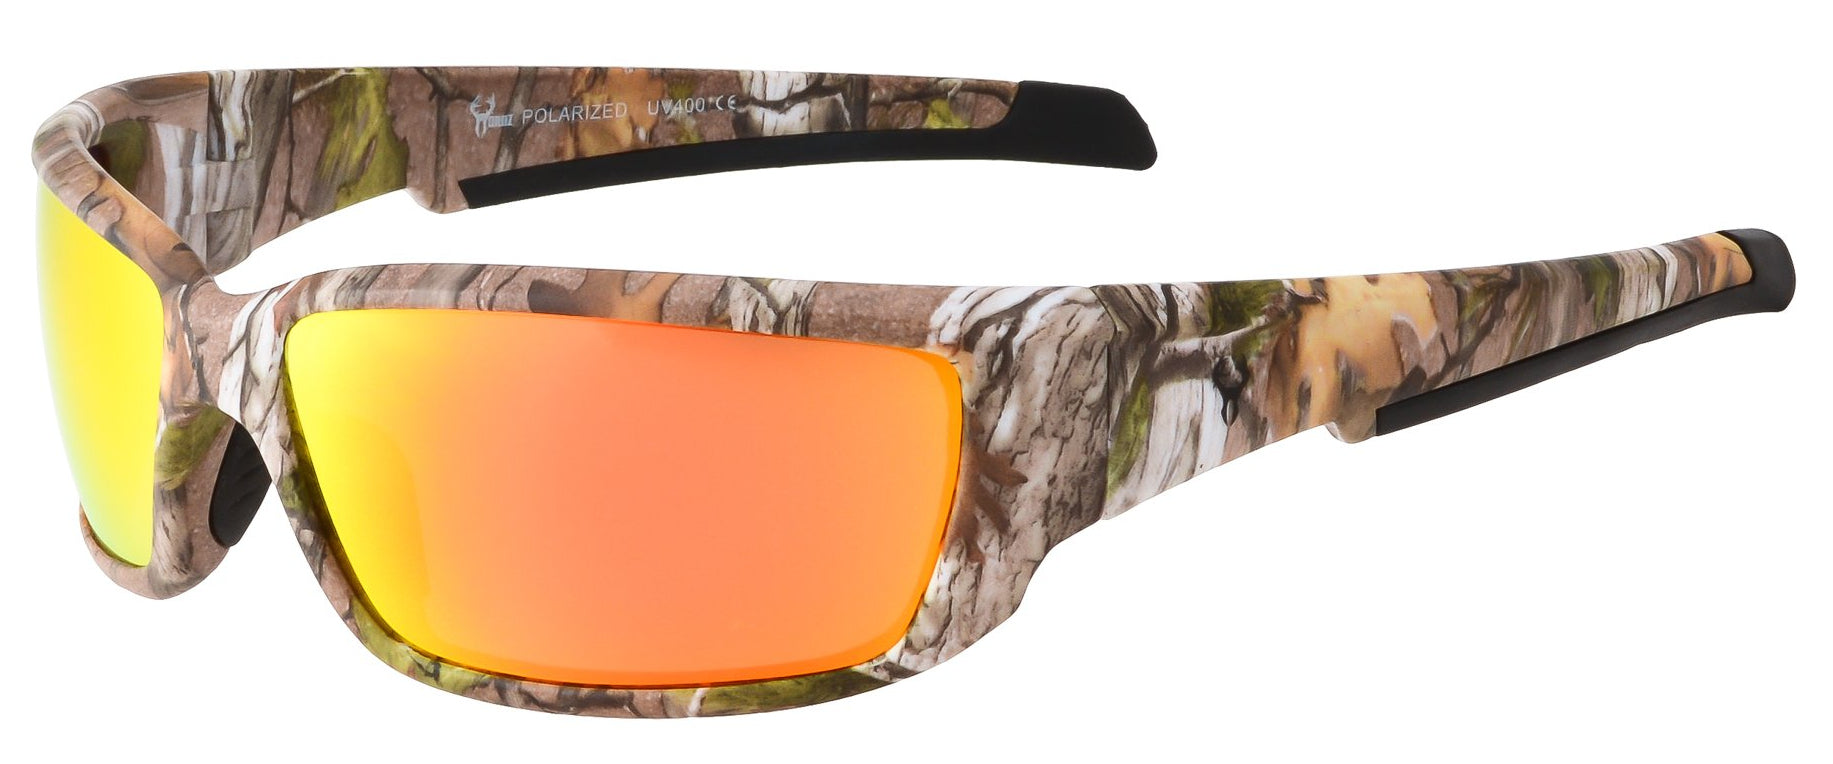 Main image: Hornz Brown Forest Camouflage Polarized Sunglasses for Men Full Frame Strong Arms & Free Matching Microfiber Pouch – Brown Camo Frame – Orange Lens